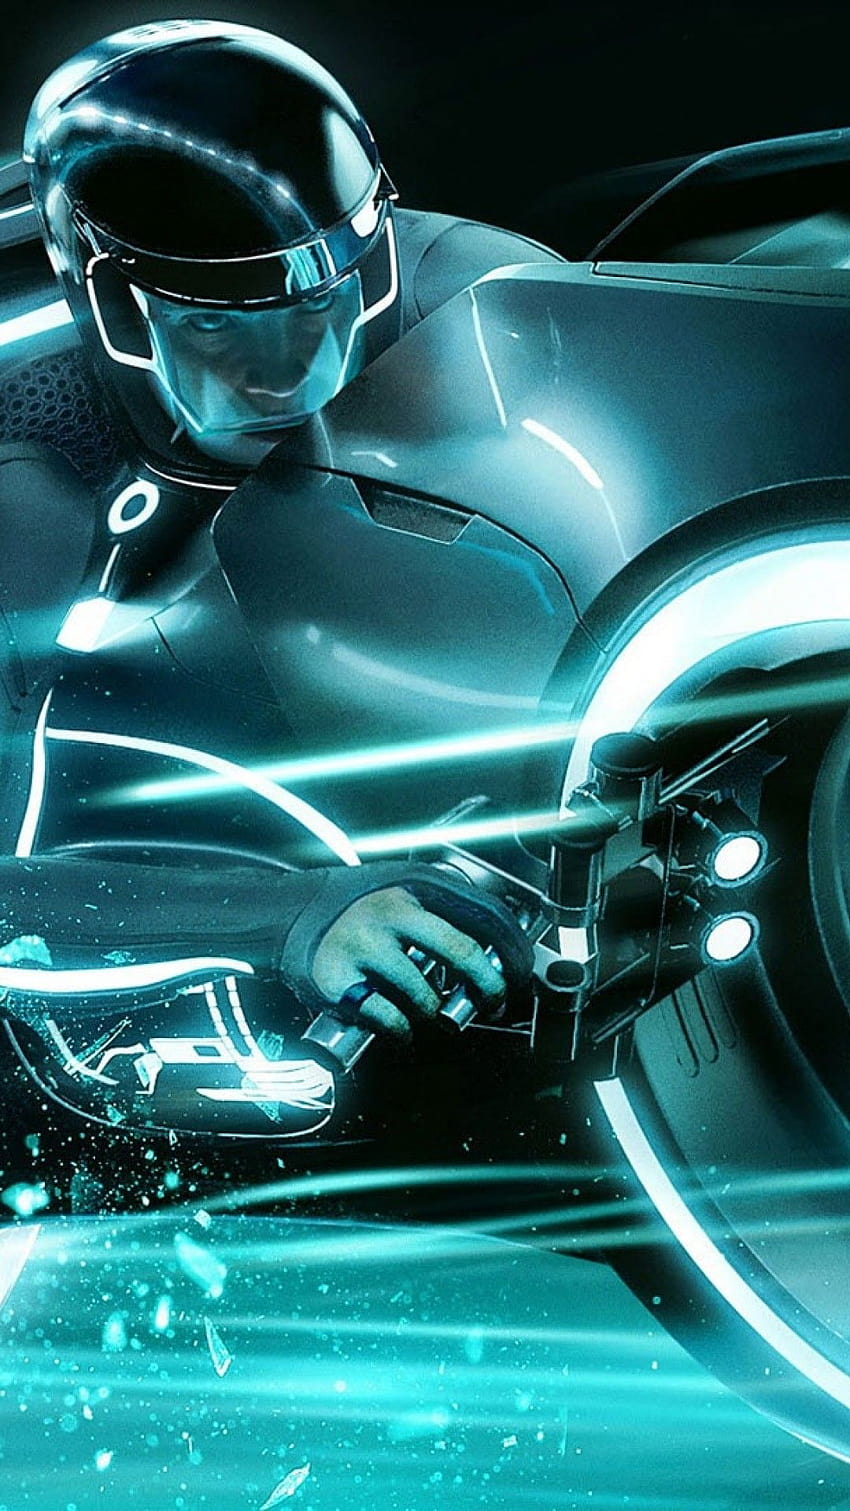 Tron Legacy for and Mobiles iPhone 6 / 6S Plus, tron legacy iphone HD phone wallpaper